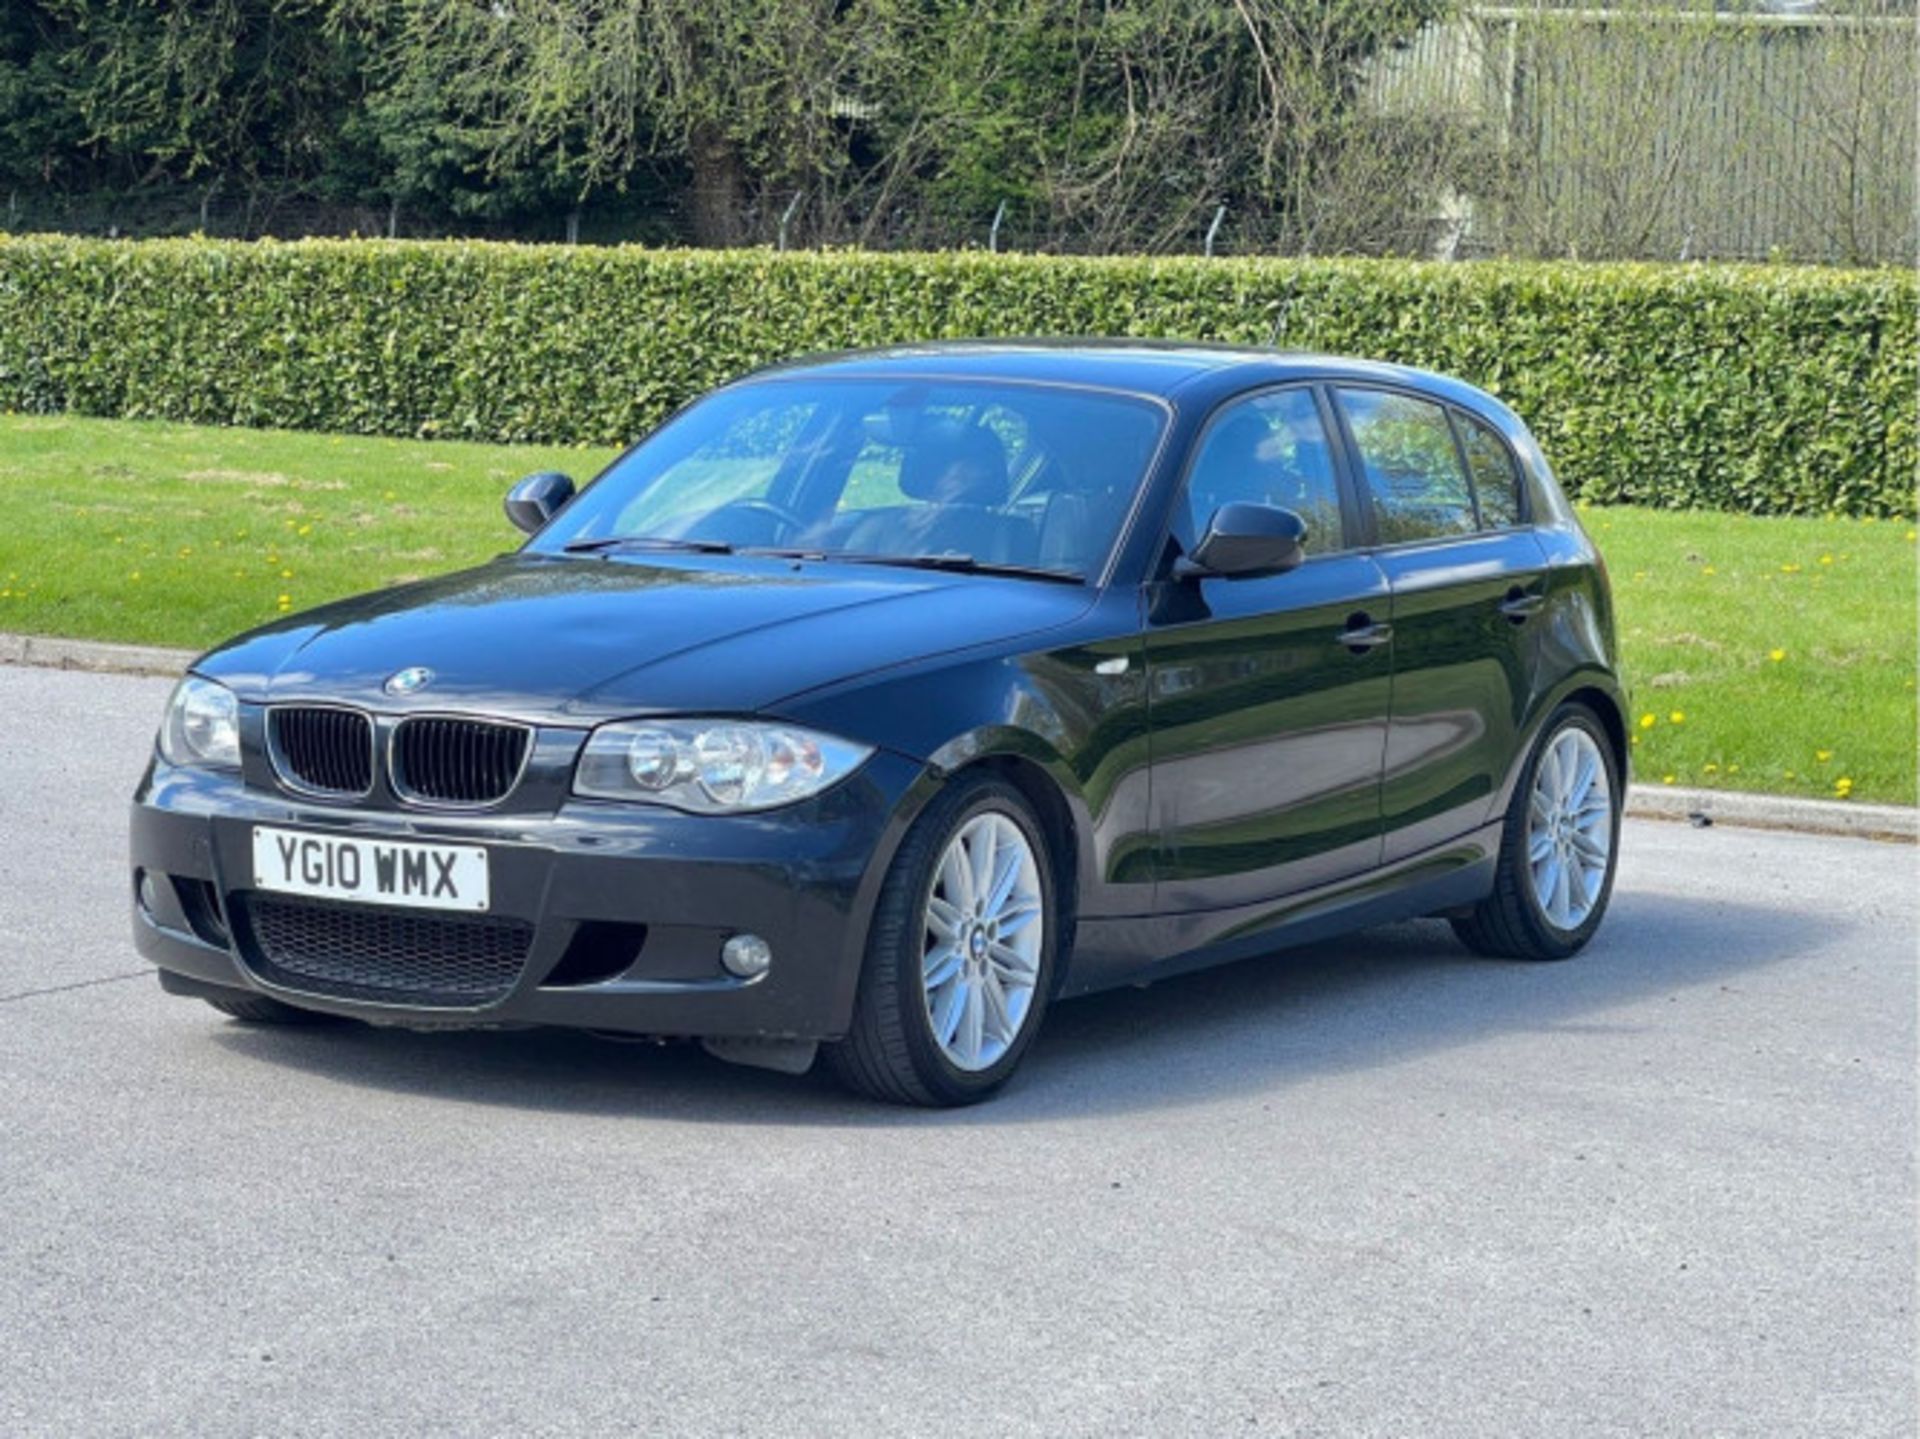 BMW 1 SERIES 2.0 118D M SPORT EURO 5 5DR (2010) - Image 9 of 58